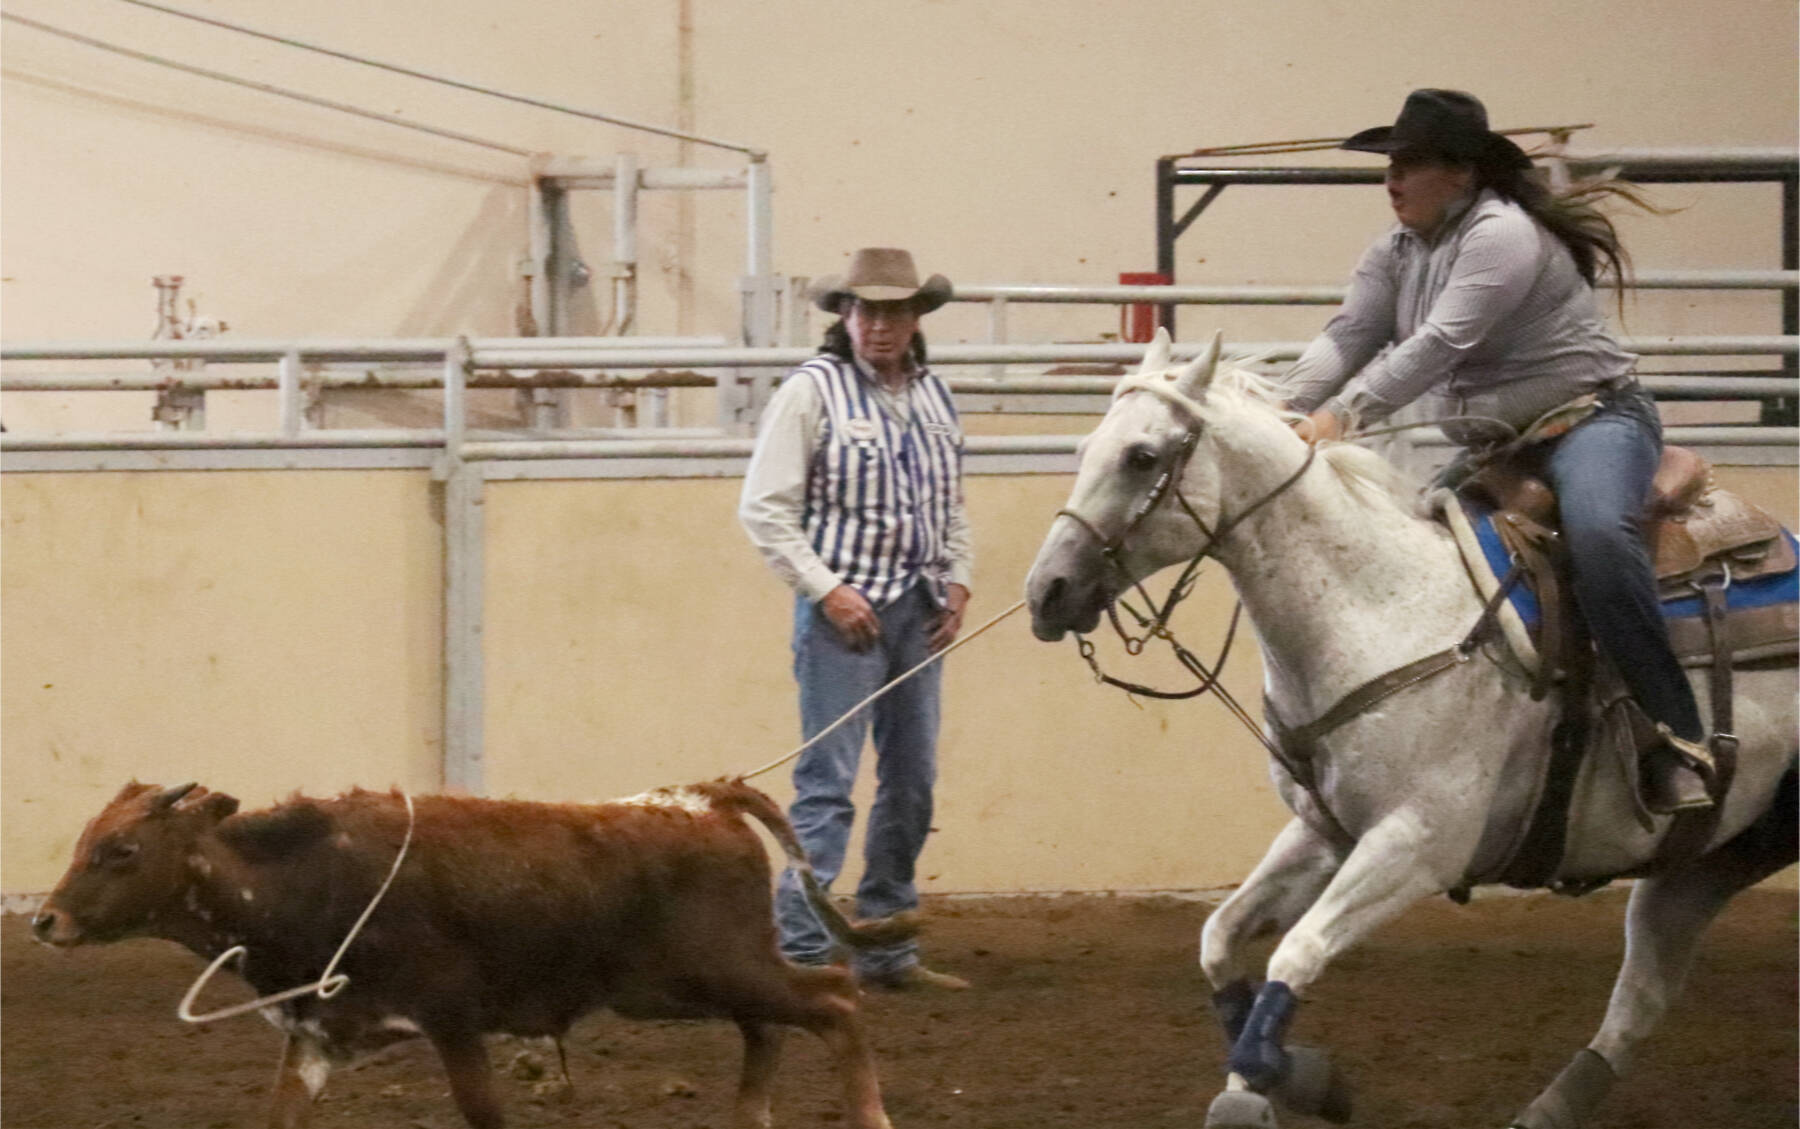 33608993_web1_230823-PON-INFR-Rodeo-Qualifier_3